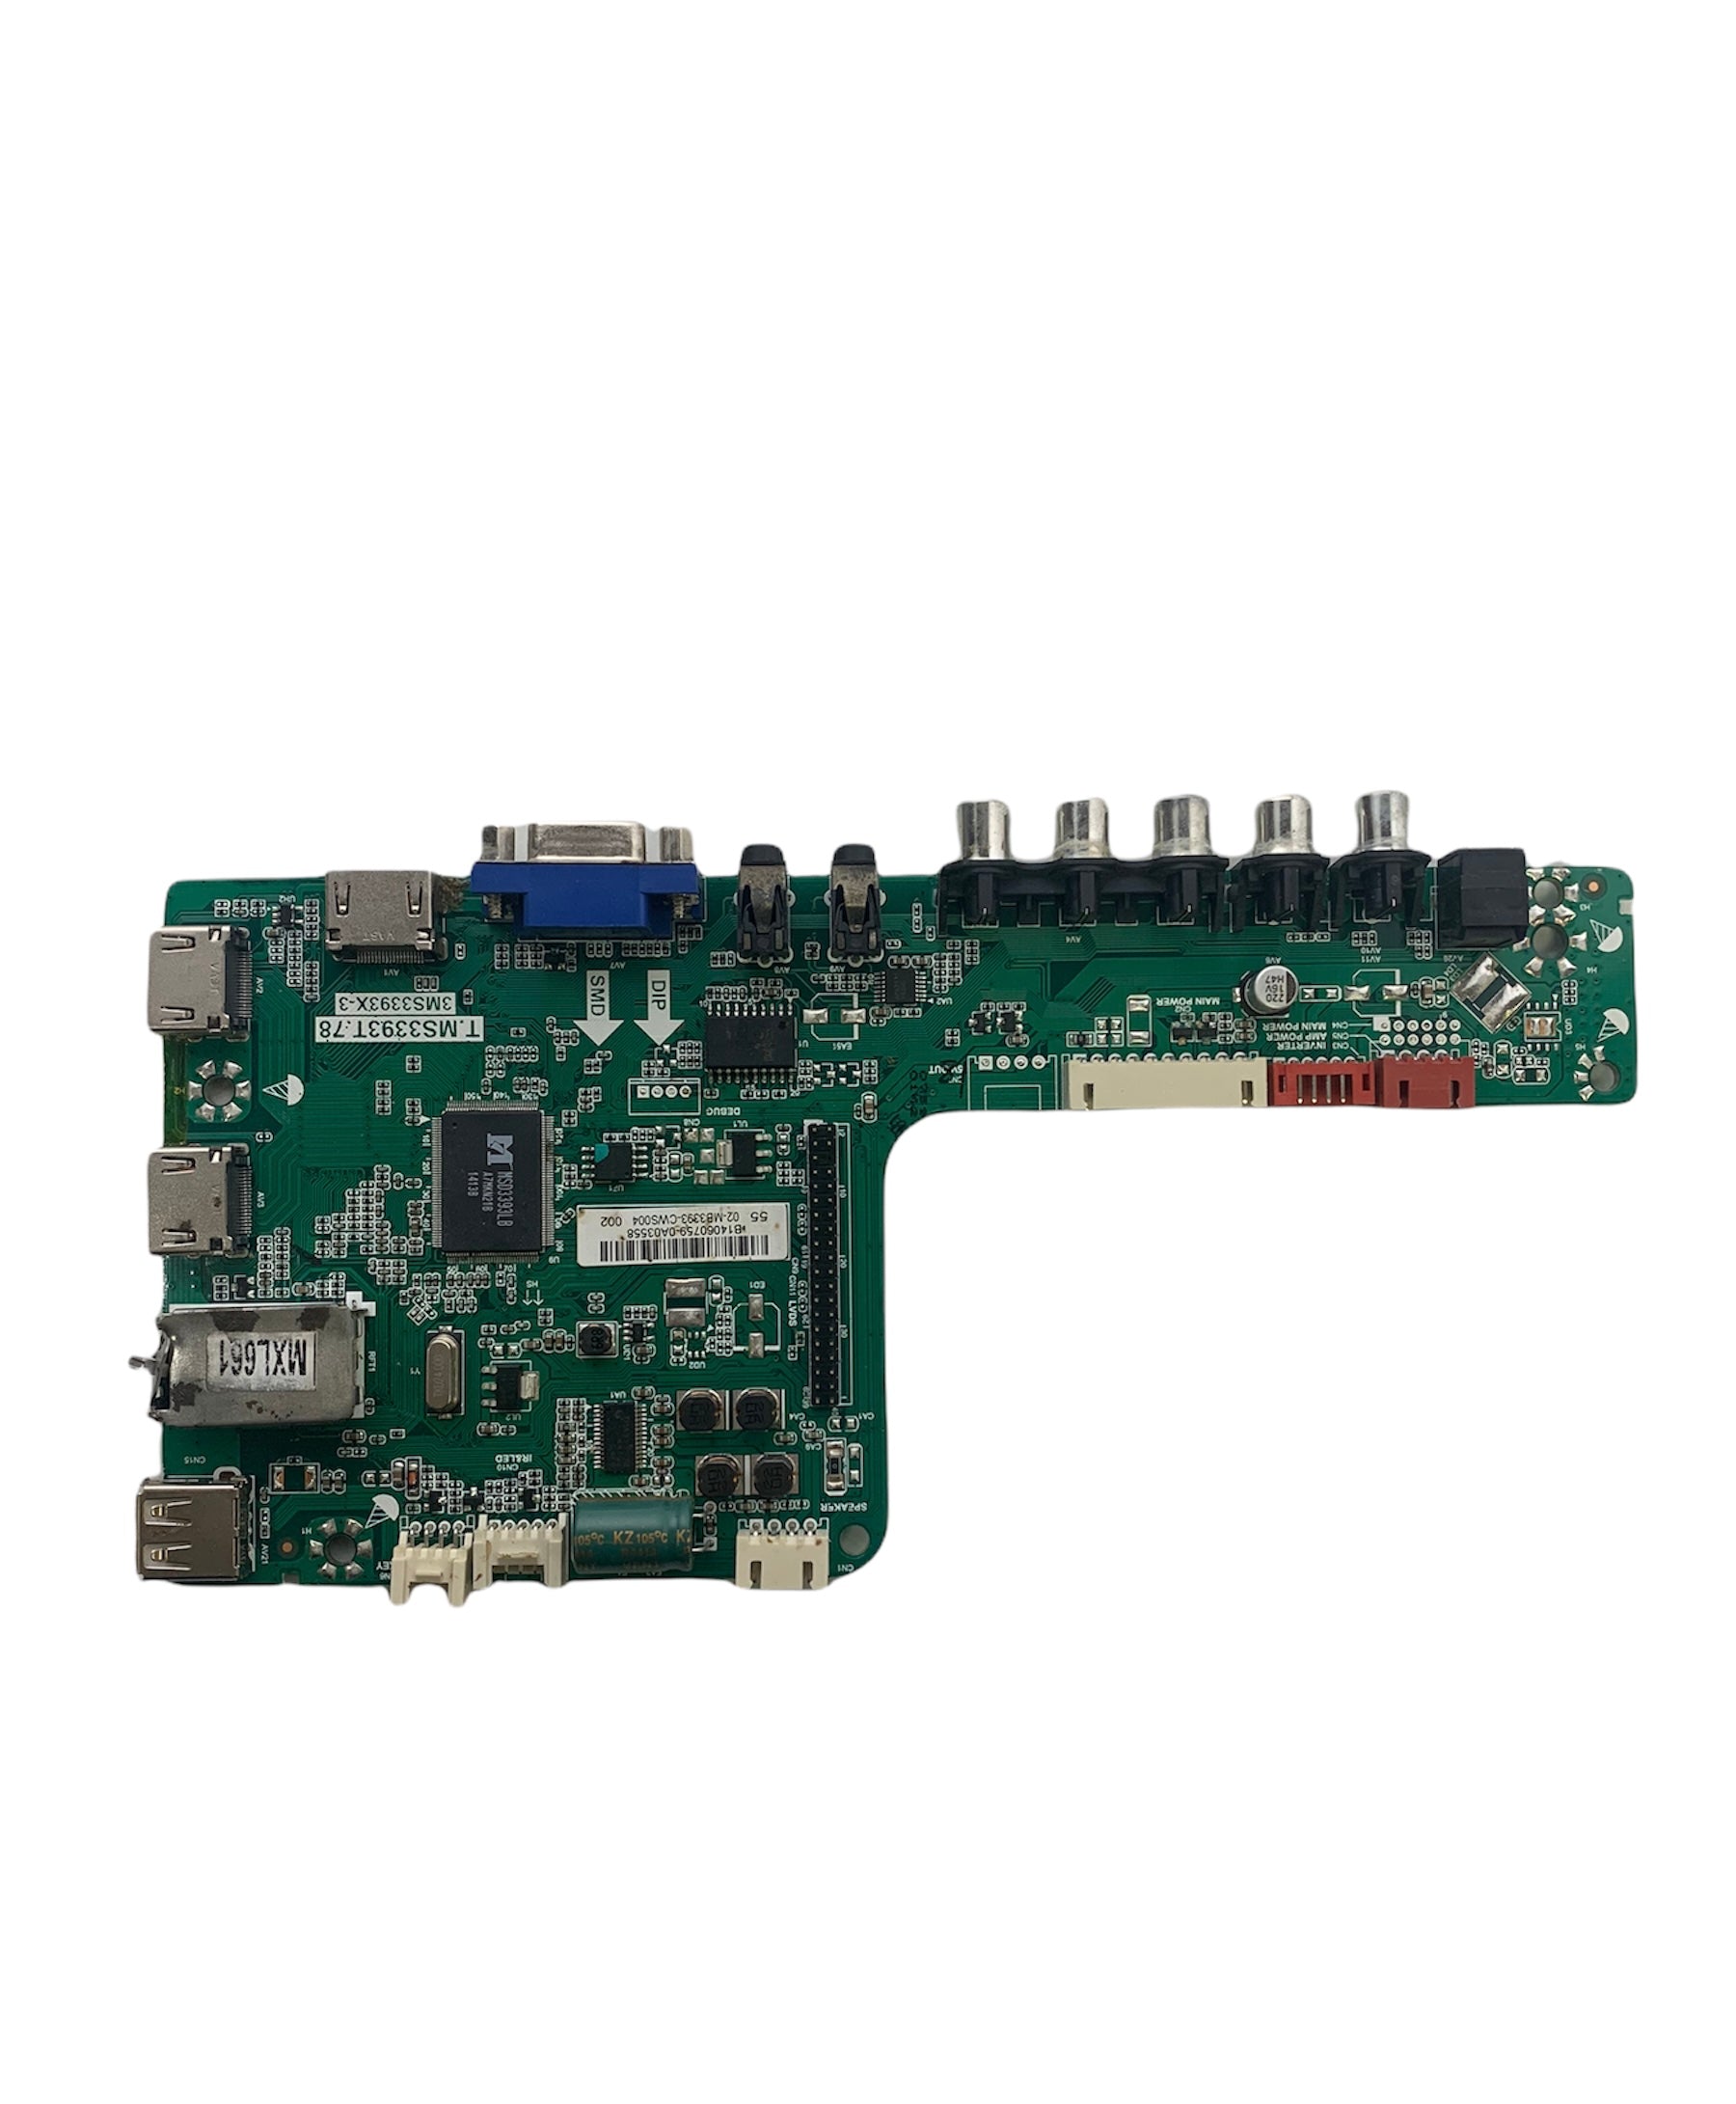 Sanyo 02-MB3393-CWS004 Main Board for DP55D44 P55D44-08 & P55D44-09